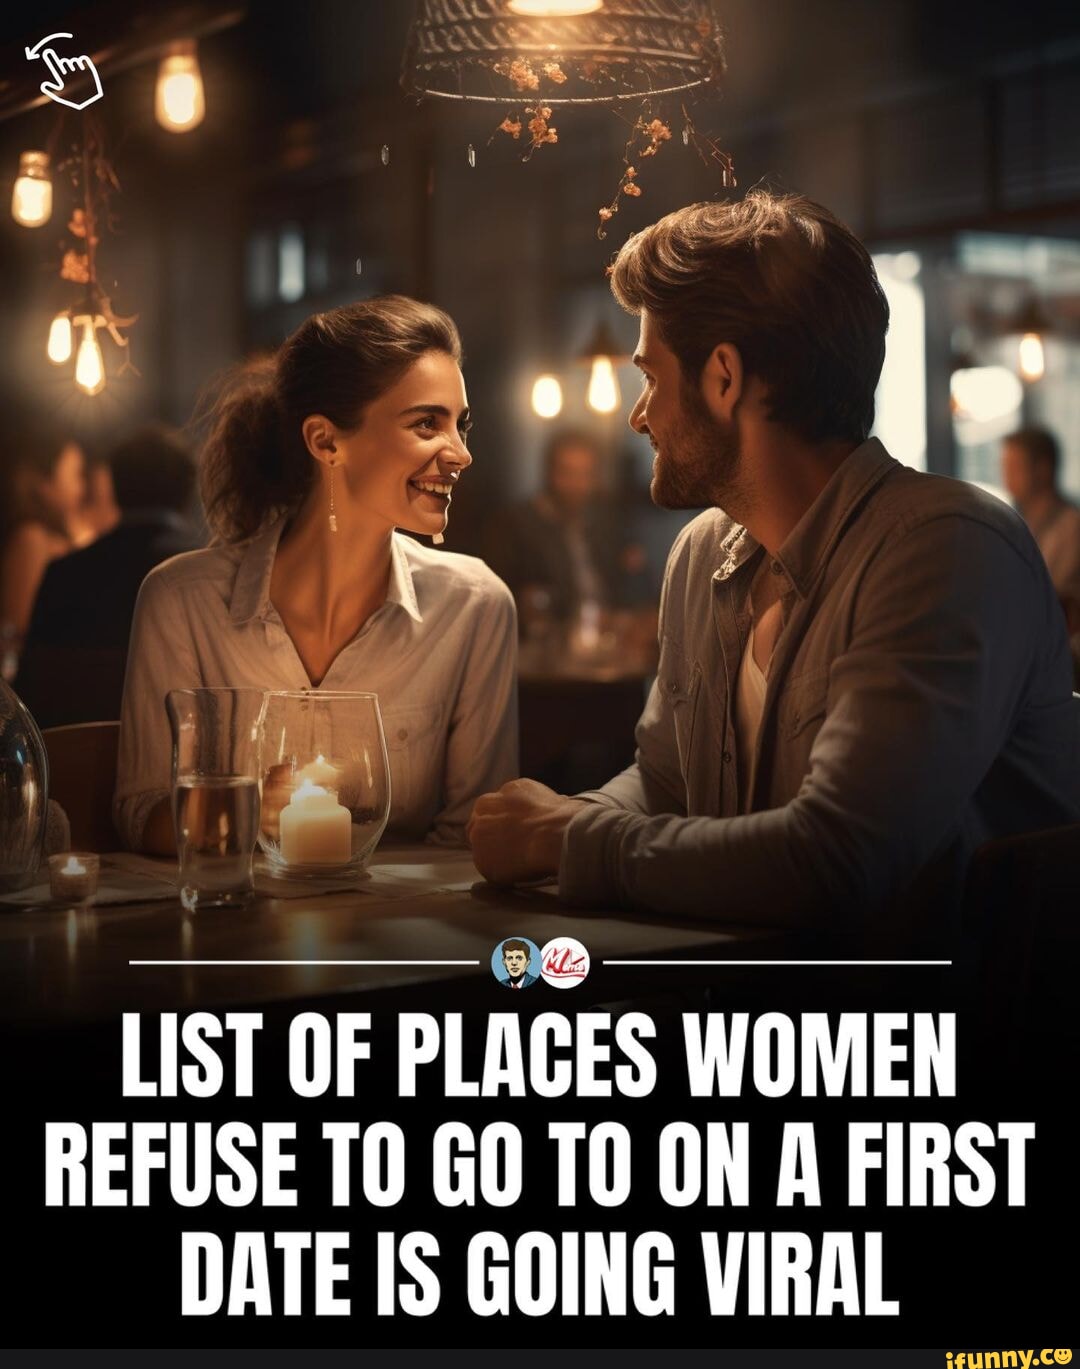 Viral list of first dates “women refuse to go to” do we agree or disag